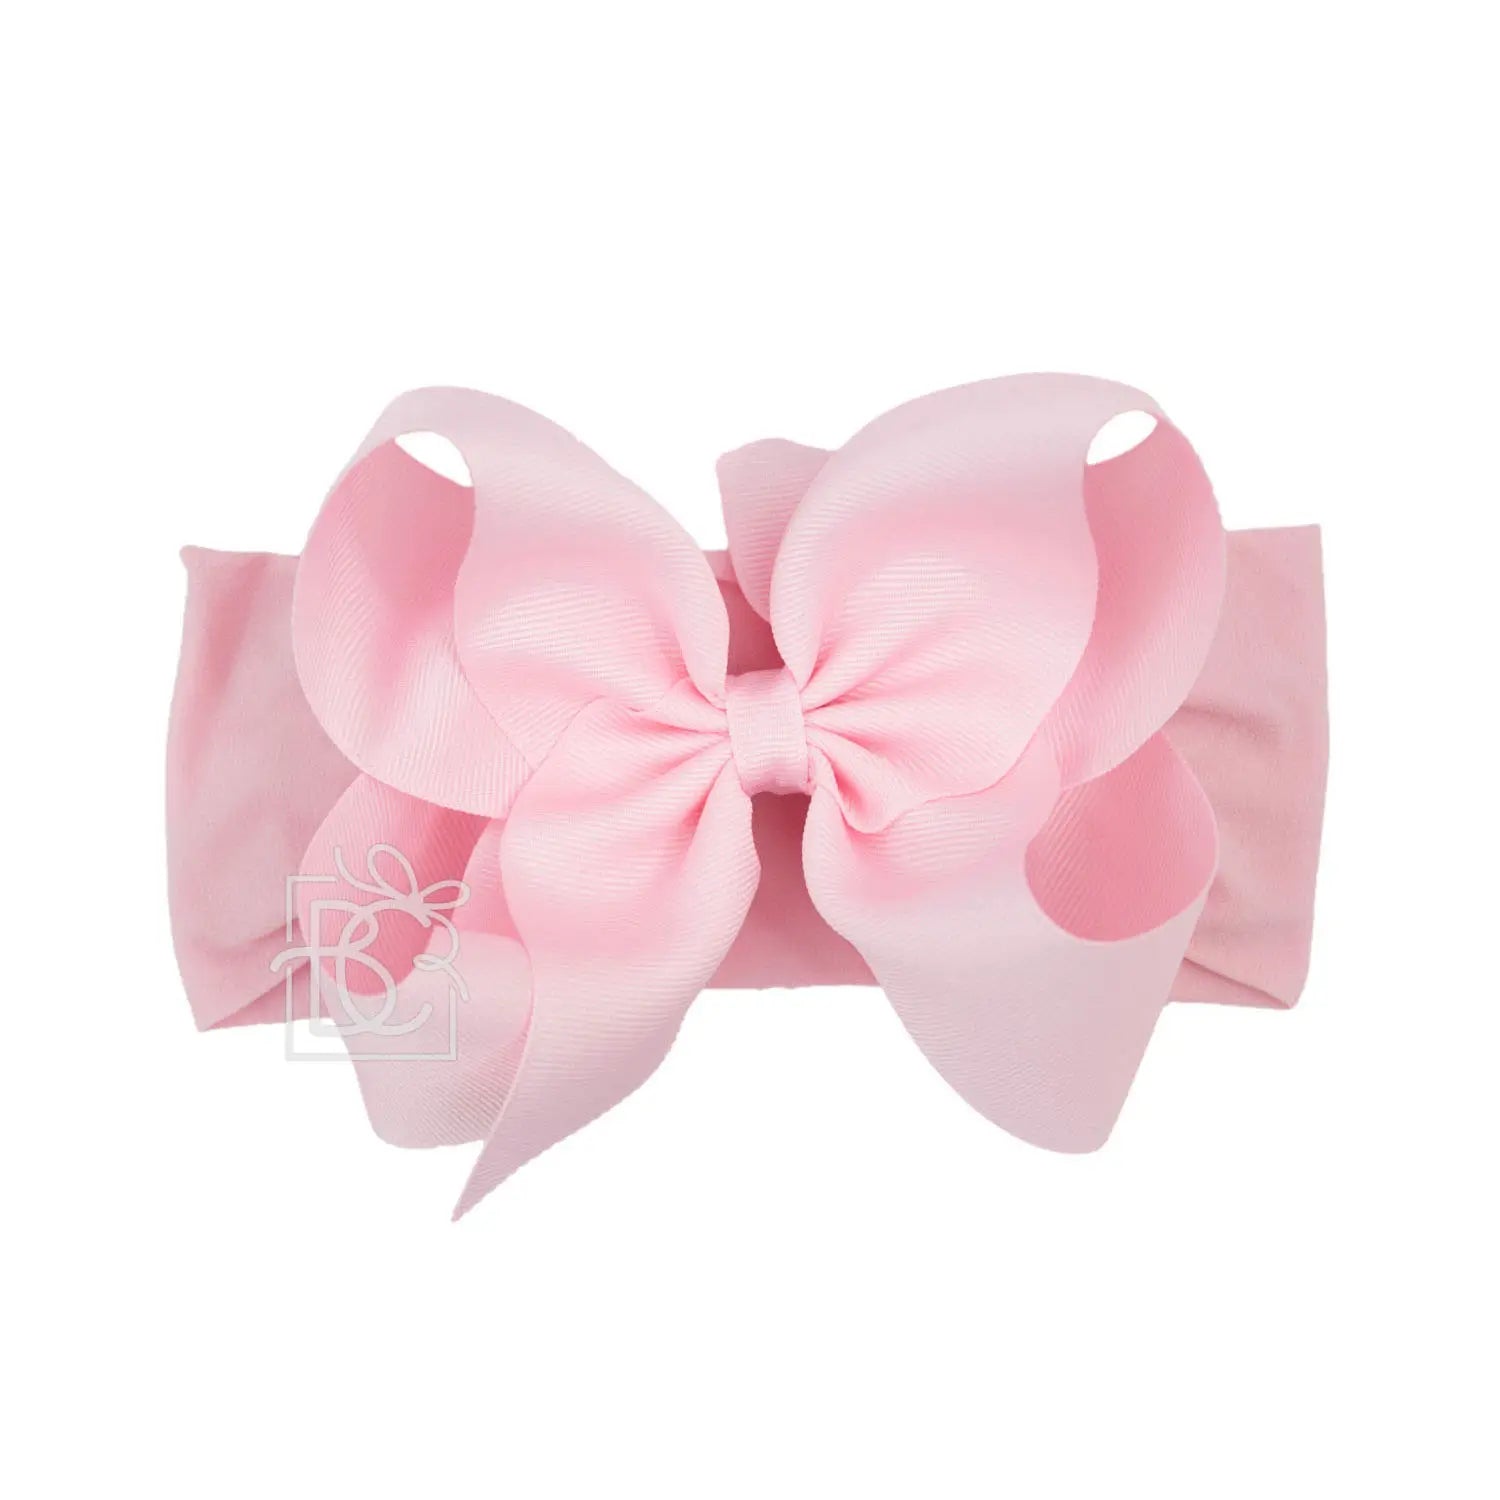 Wide Headband with 5.5" Signature Grosgrain Bow - Light Pink